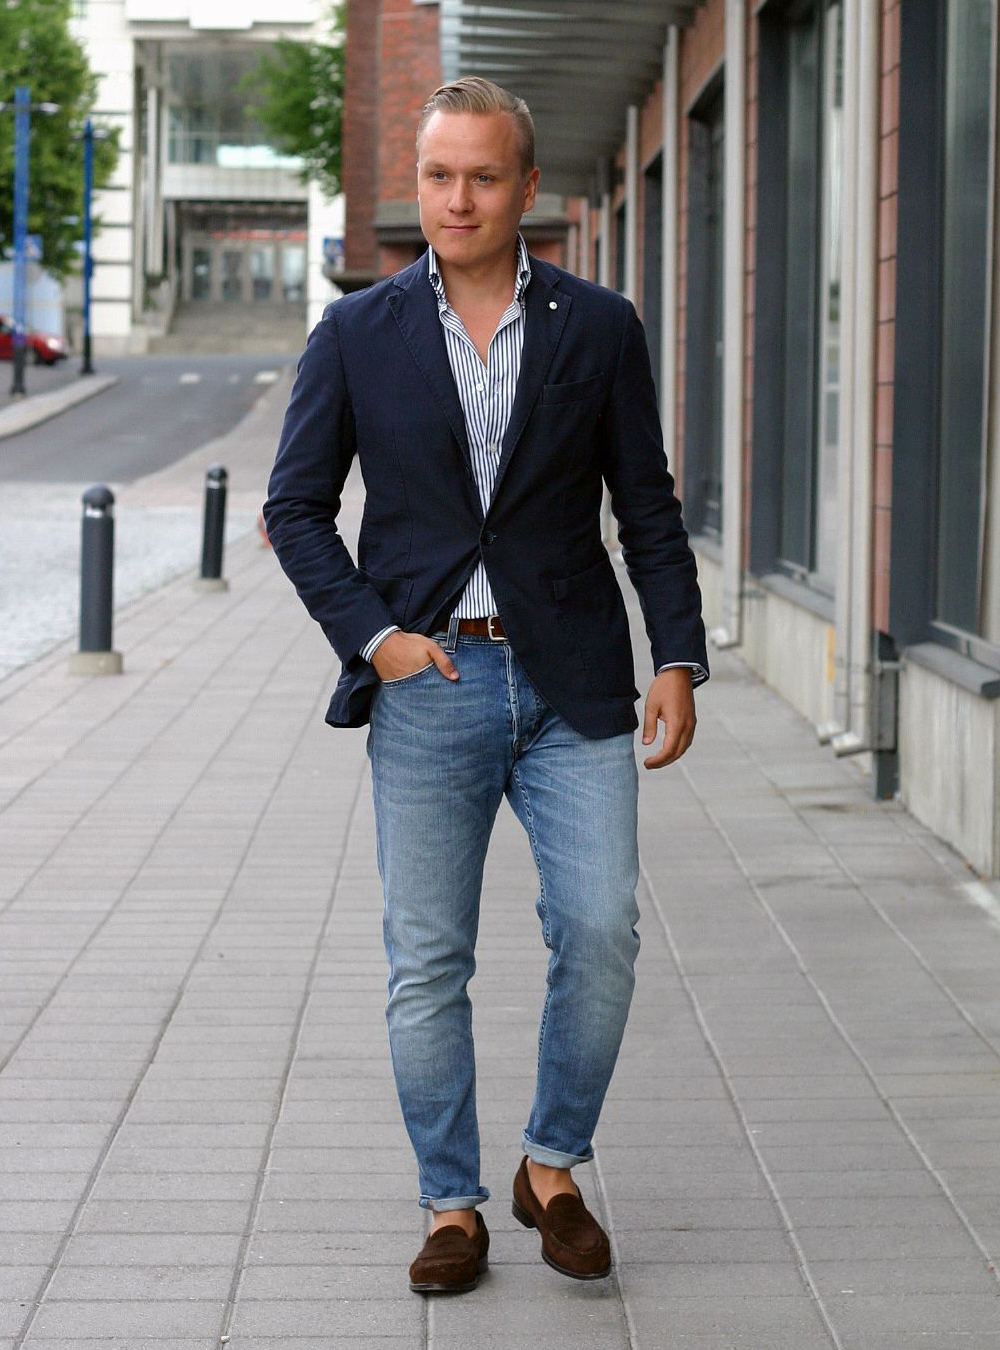 navy blazer, blue striped shirt, blue jeans, and brown suede loafers